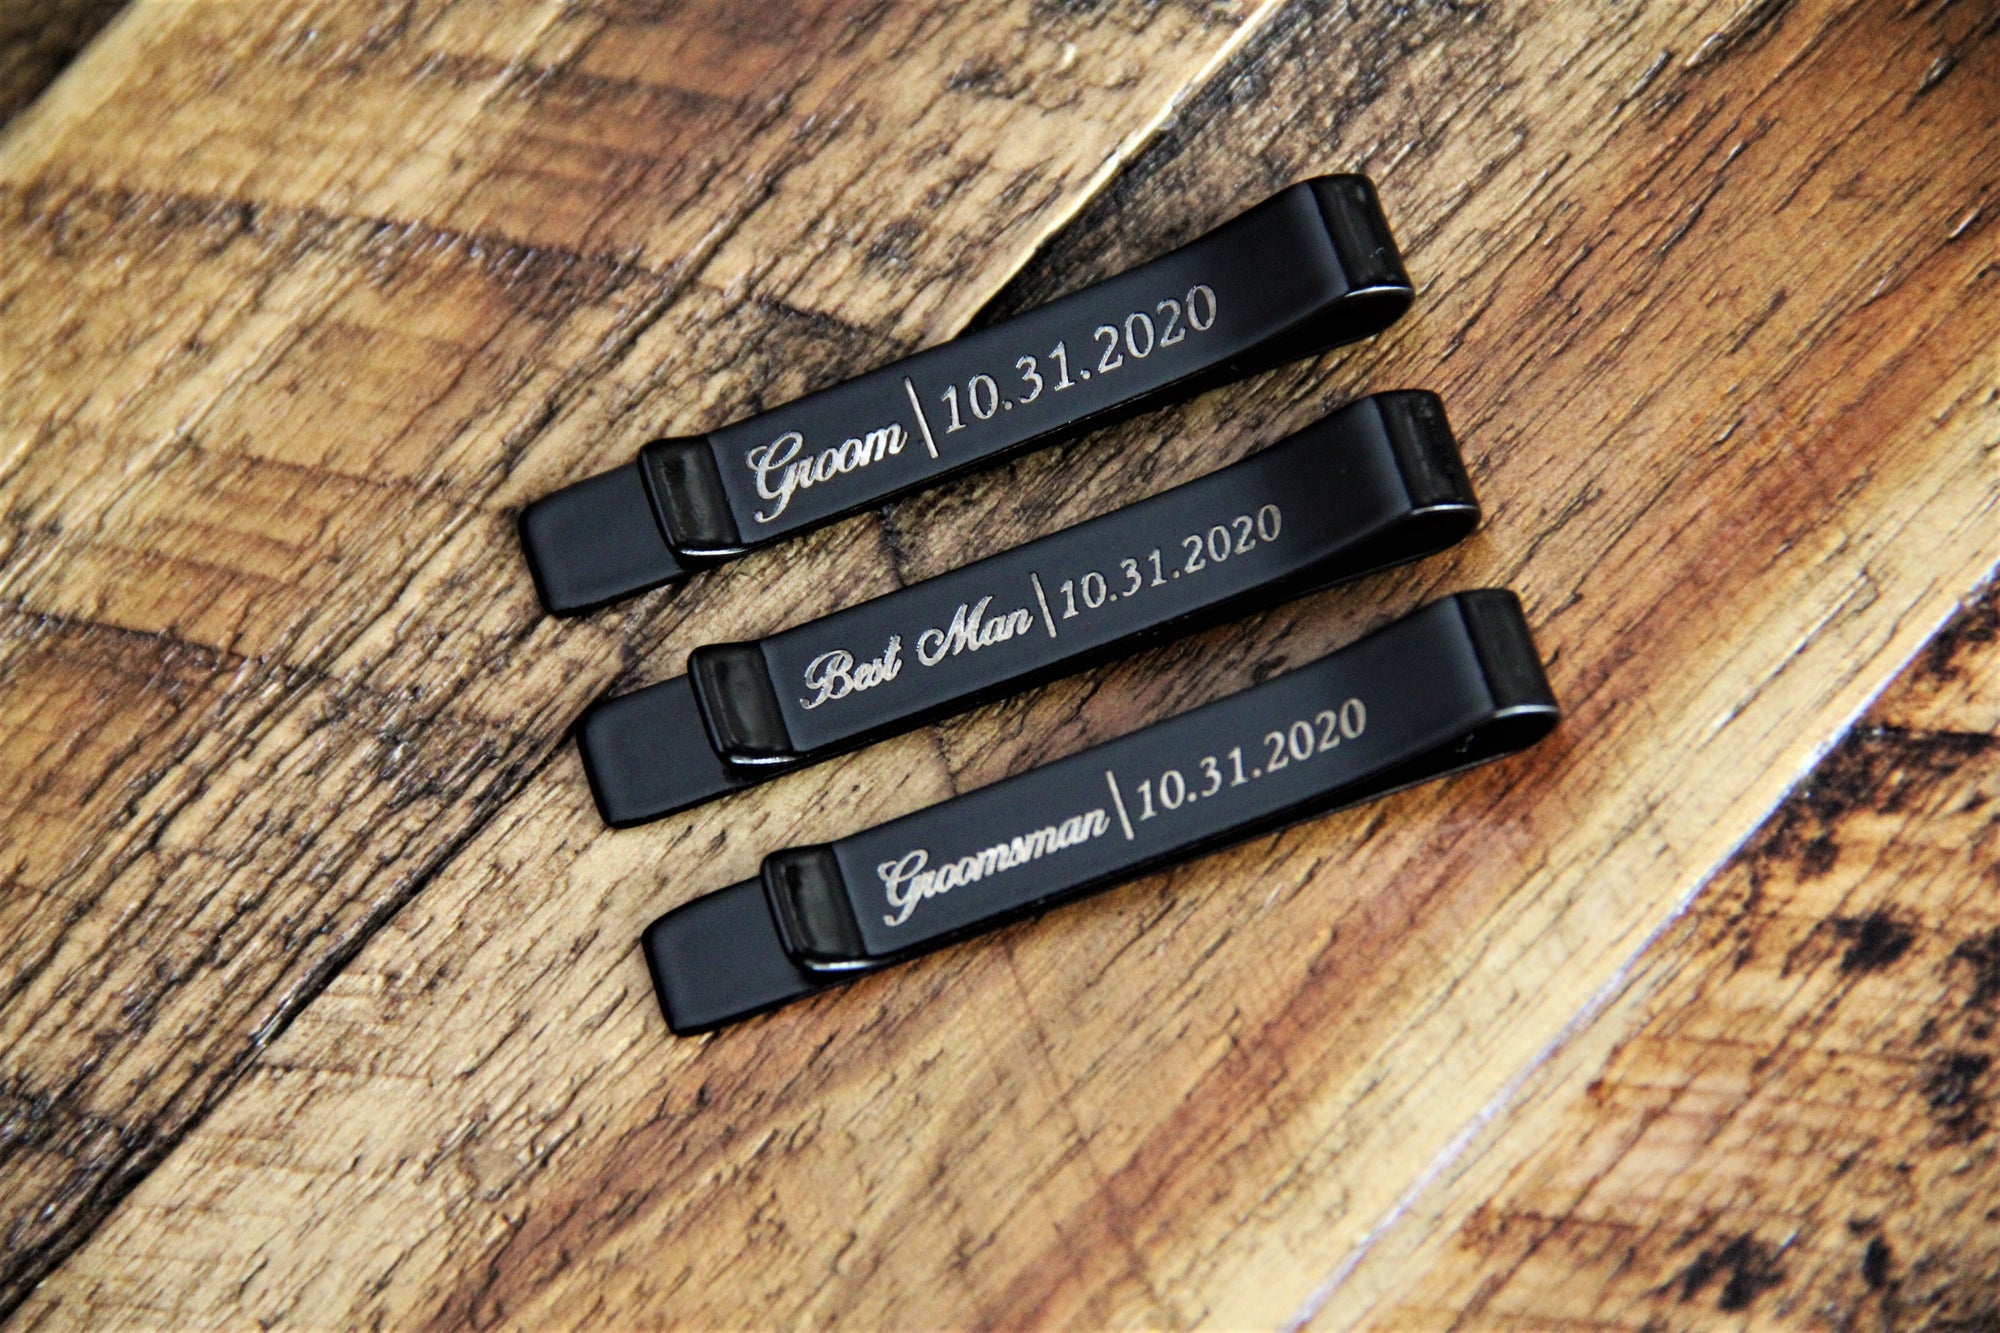 PRYCLIP Bottle Opener Tie Clip (Free Engraving for Groomsman Gifts)